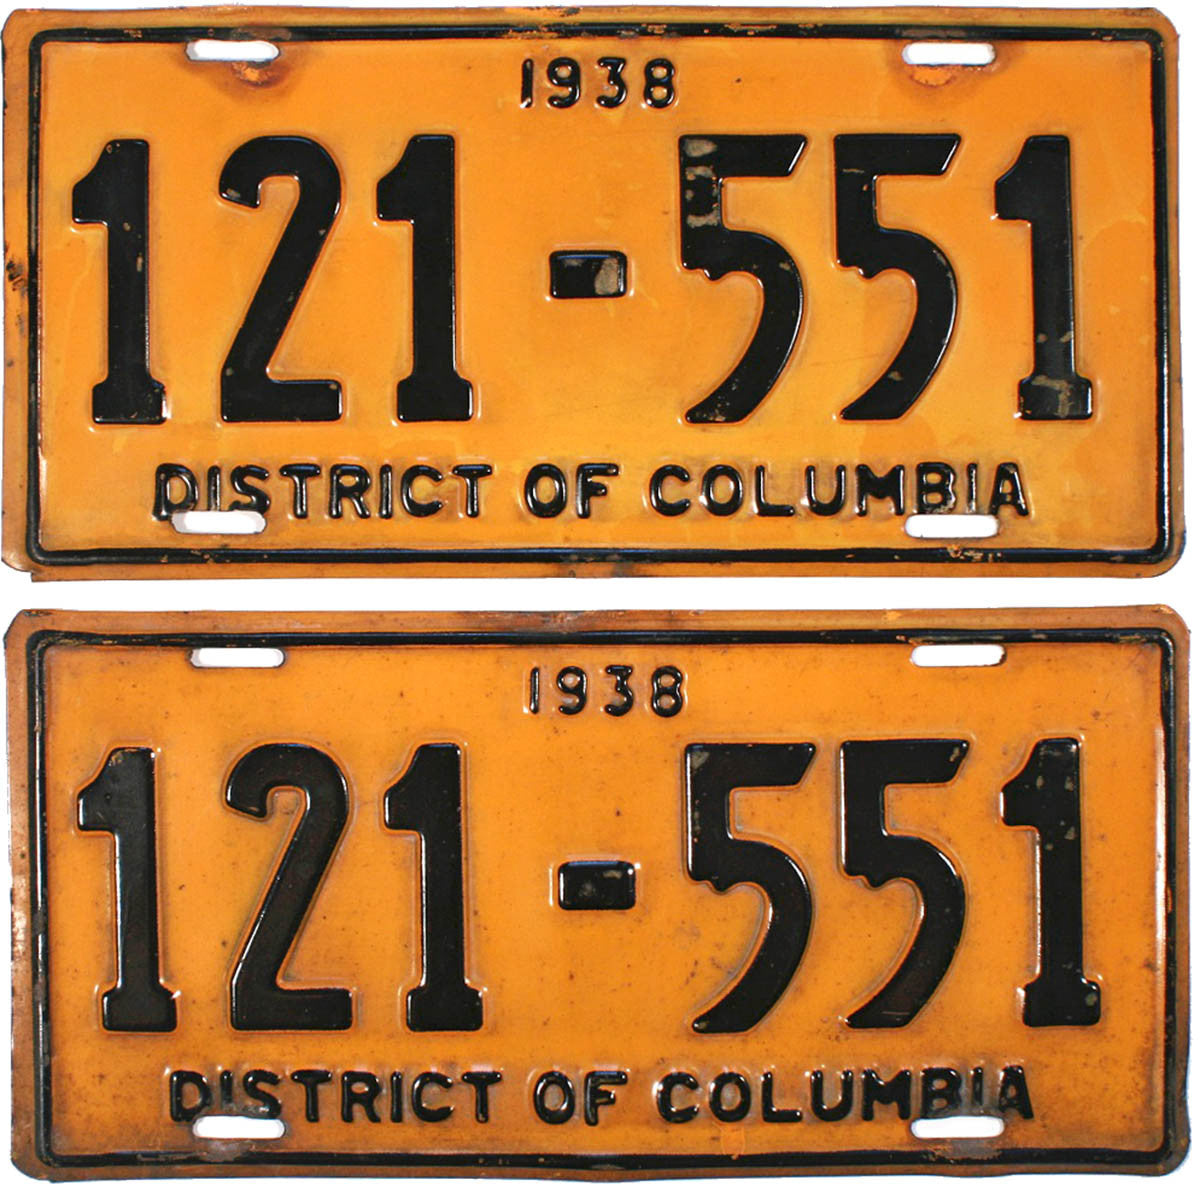 1938 District of Columbia License Plates